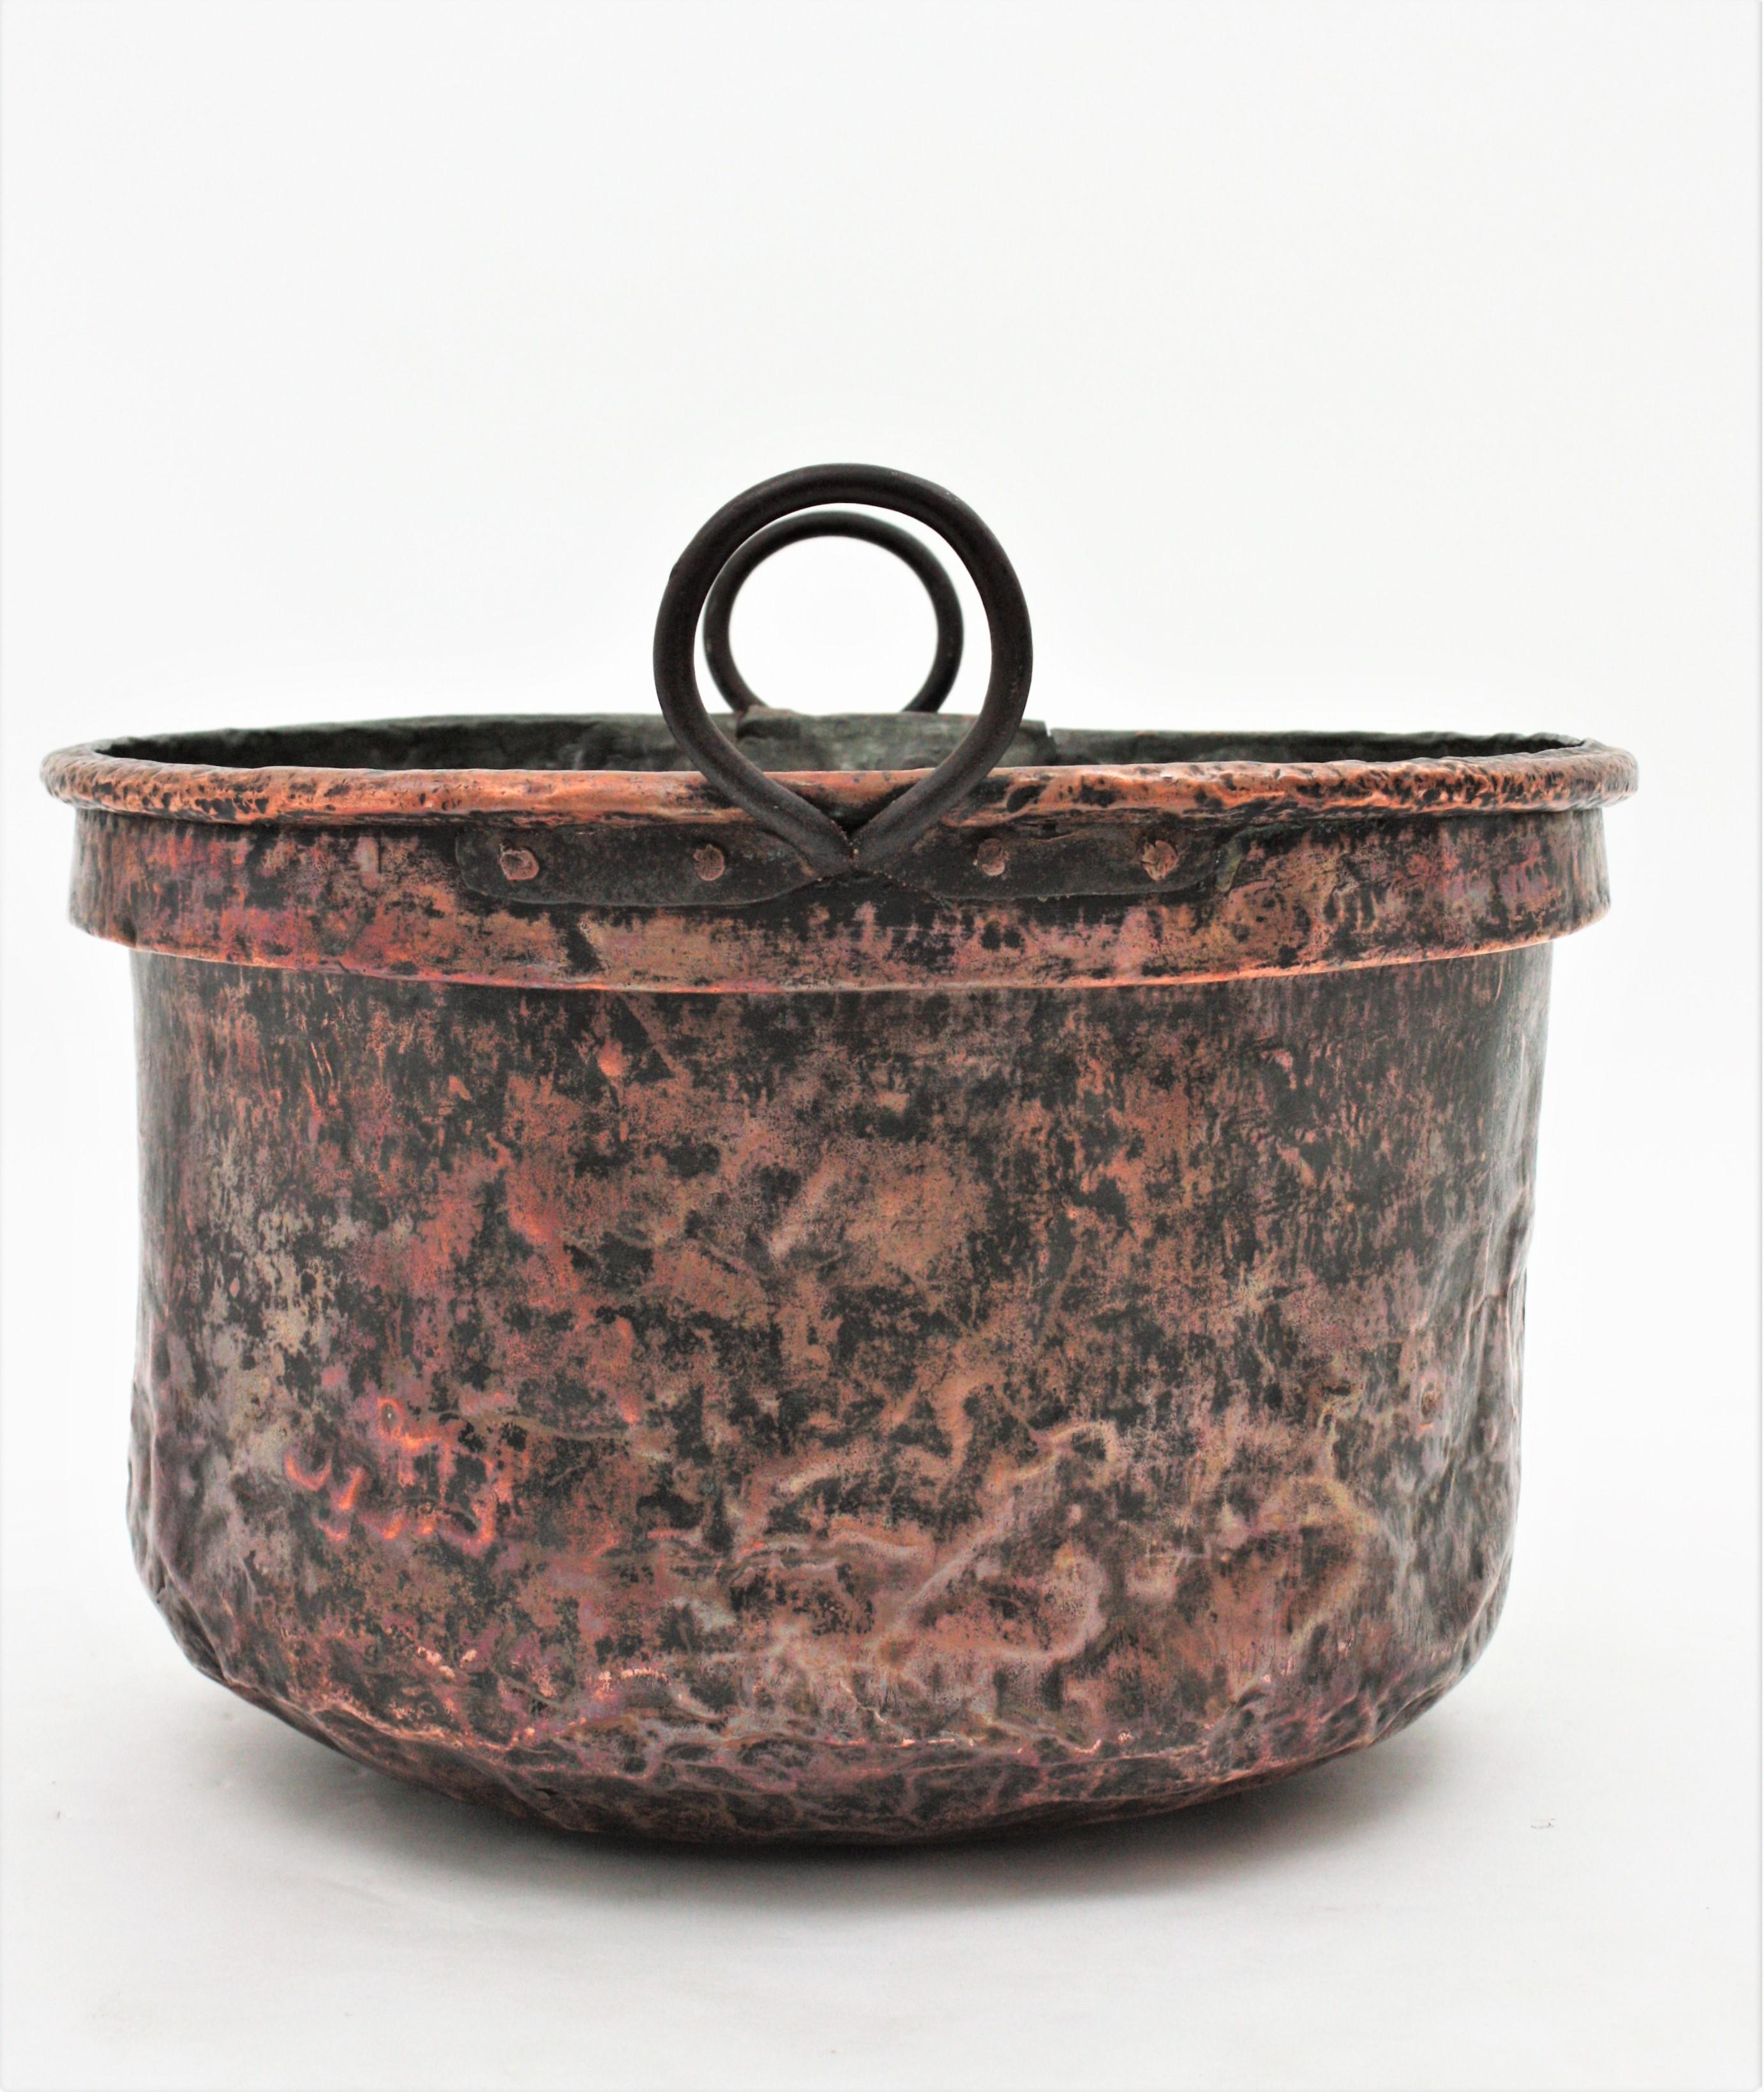 Hammered Massive 19th Century French Copper Cauldron with Handles and Terrific Patina